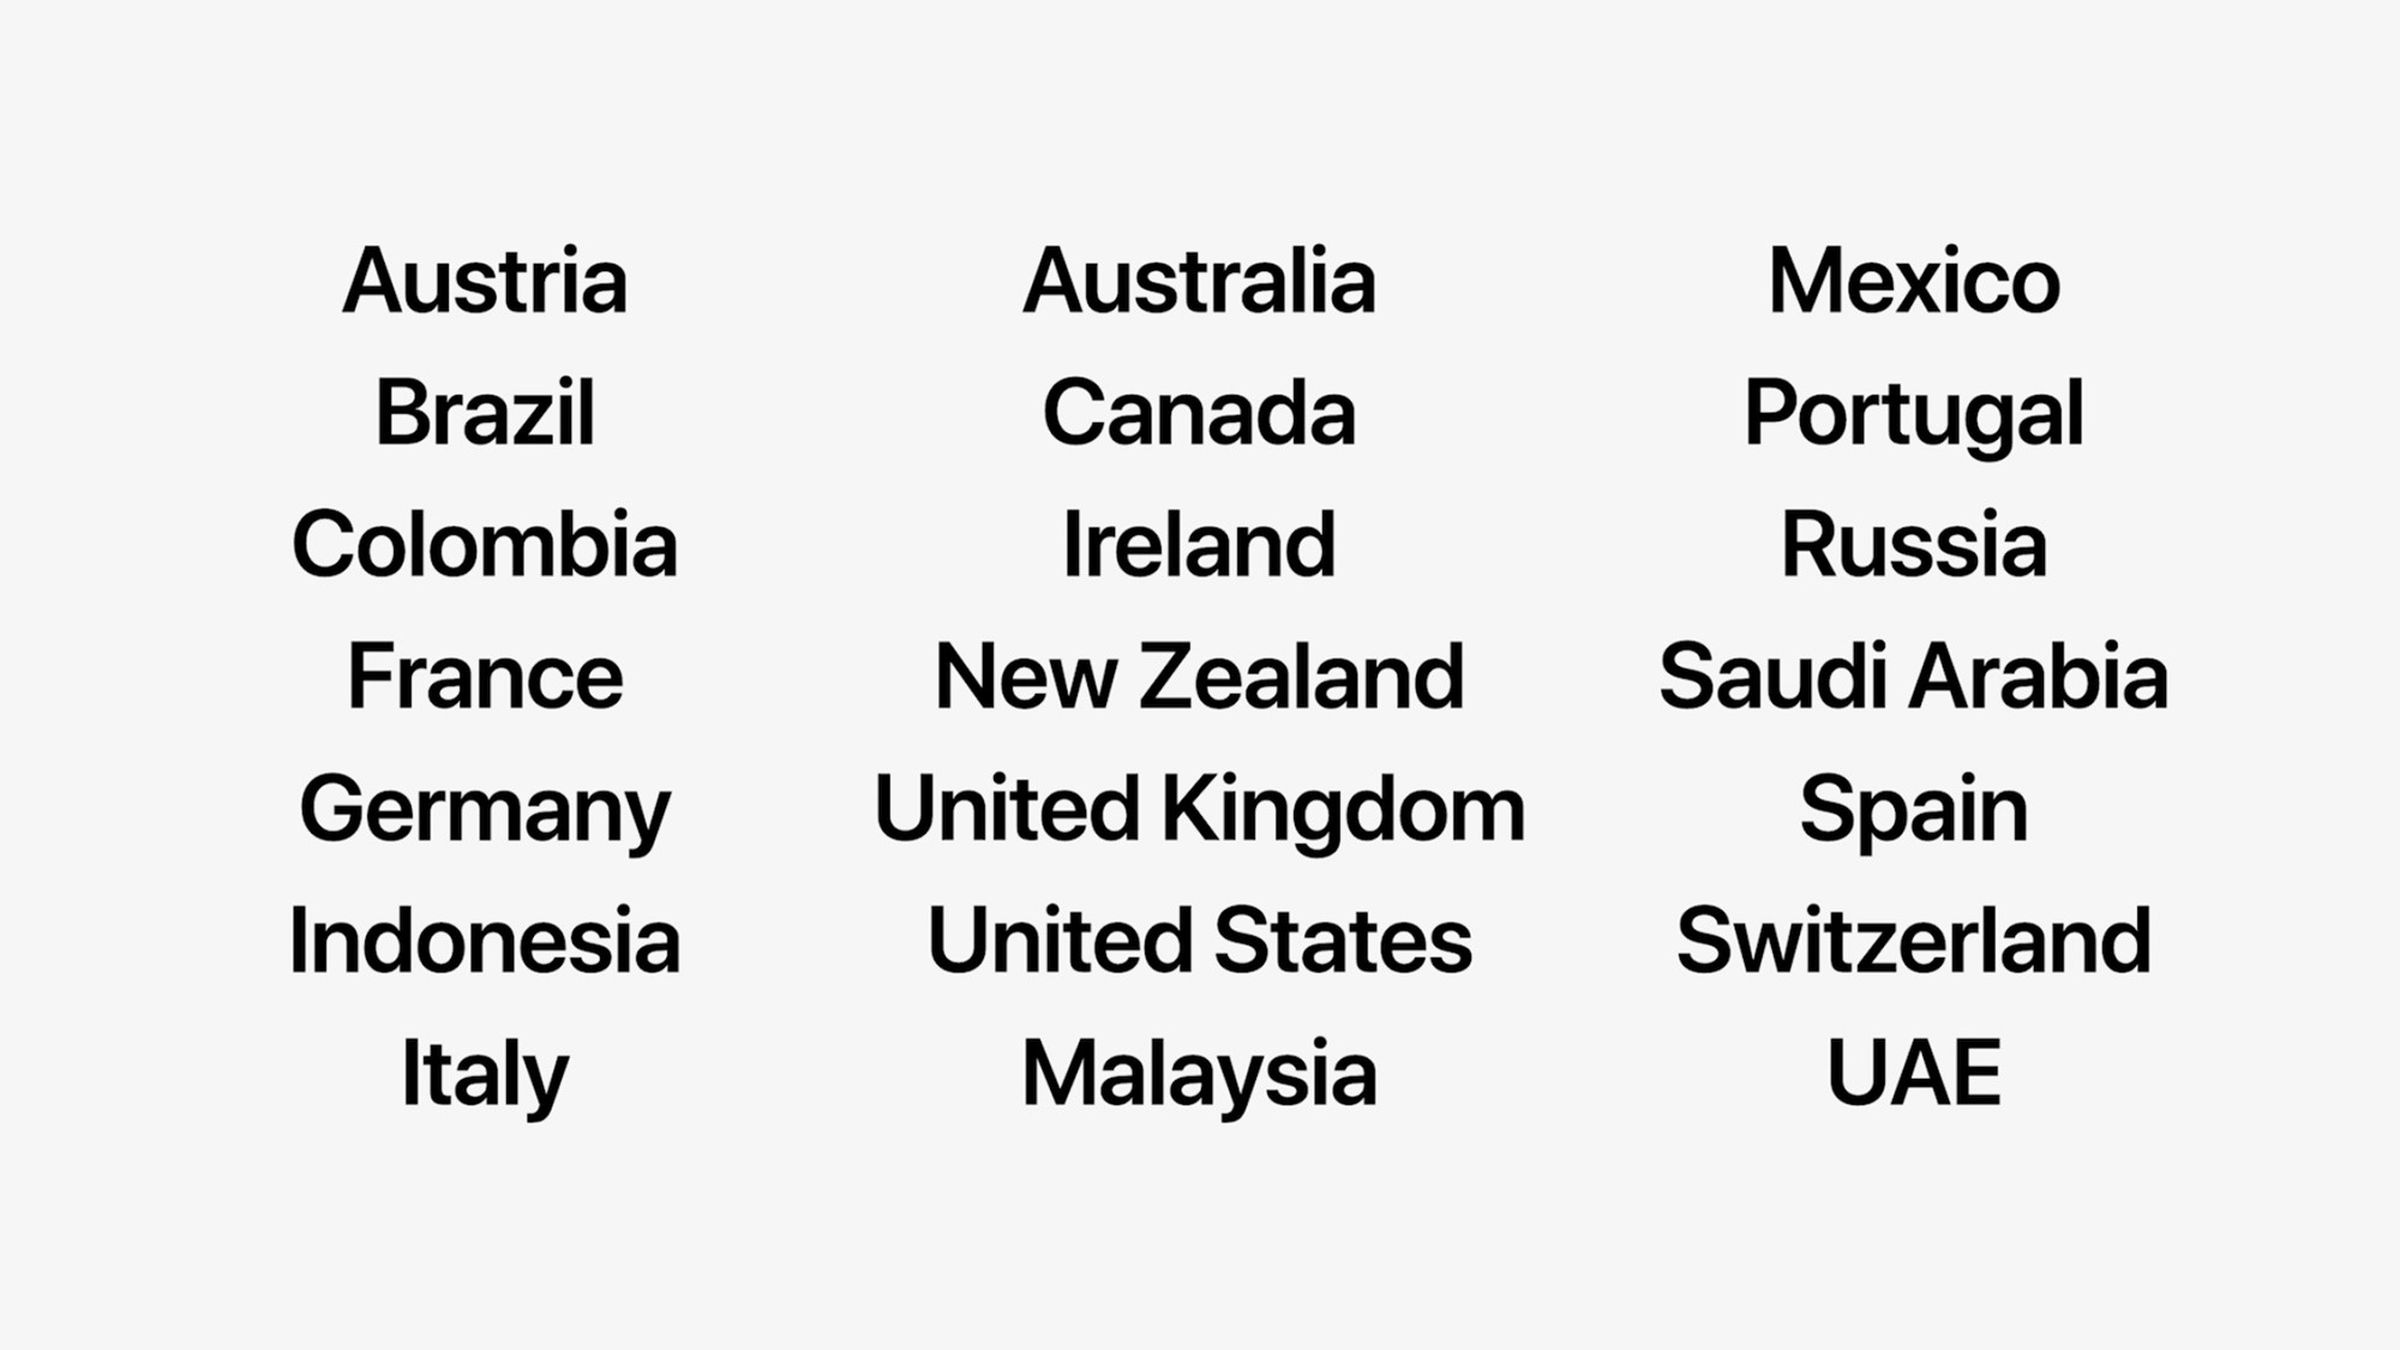 Fitness Plus will soon be available in these countries.